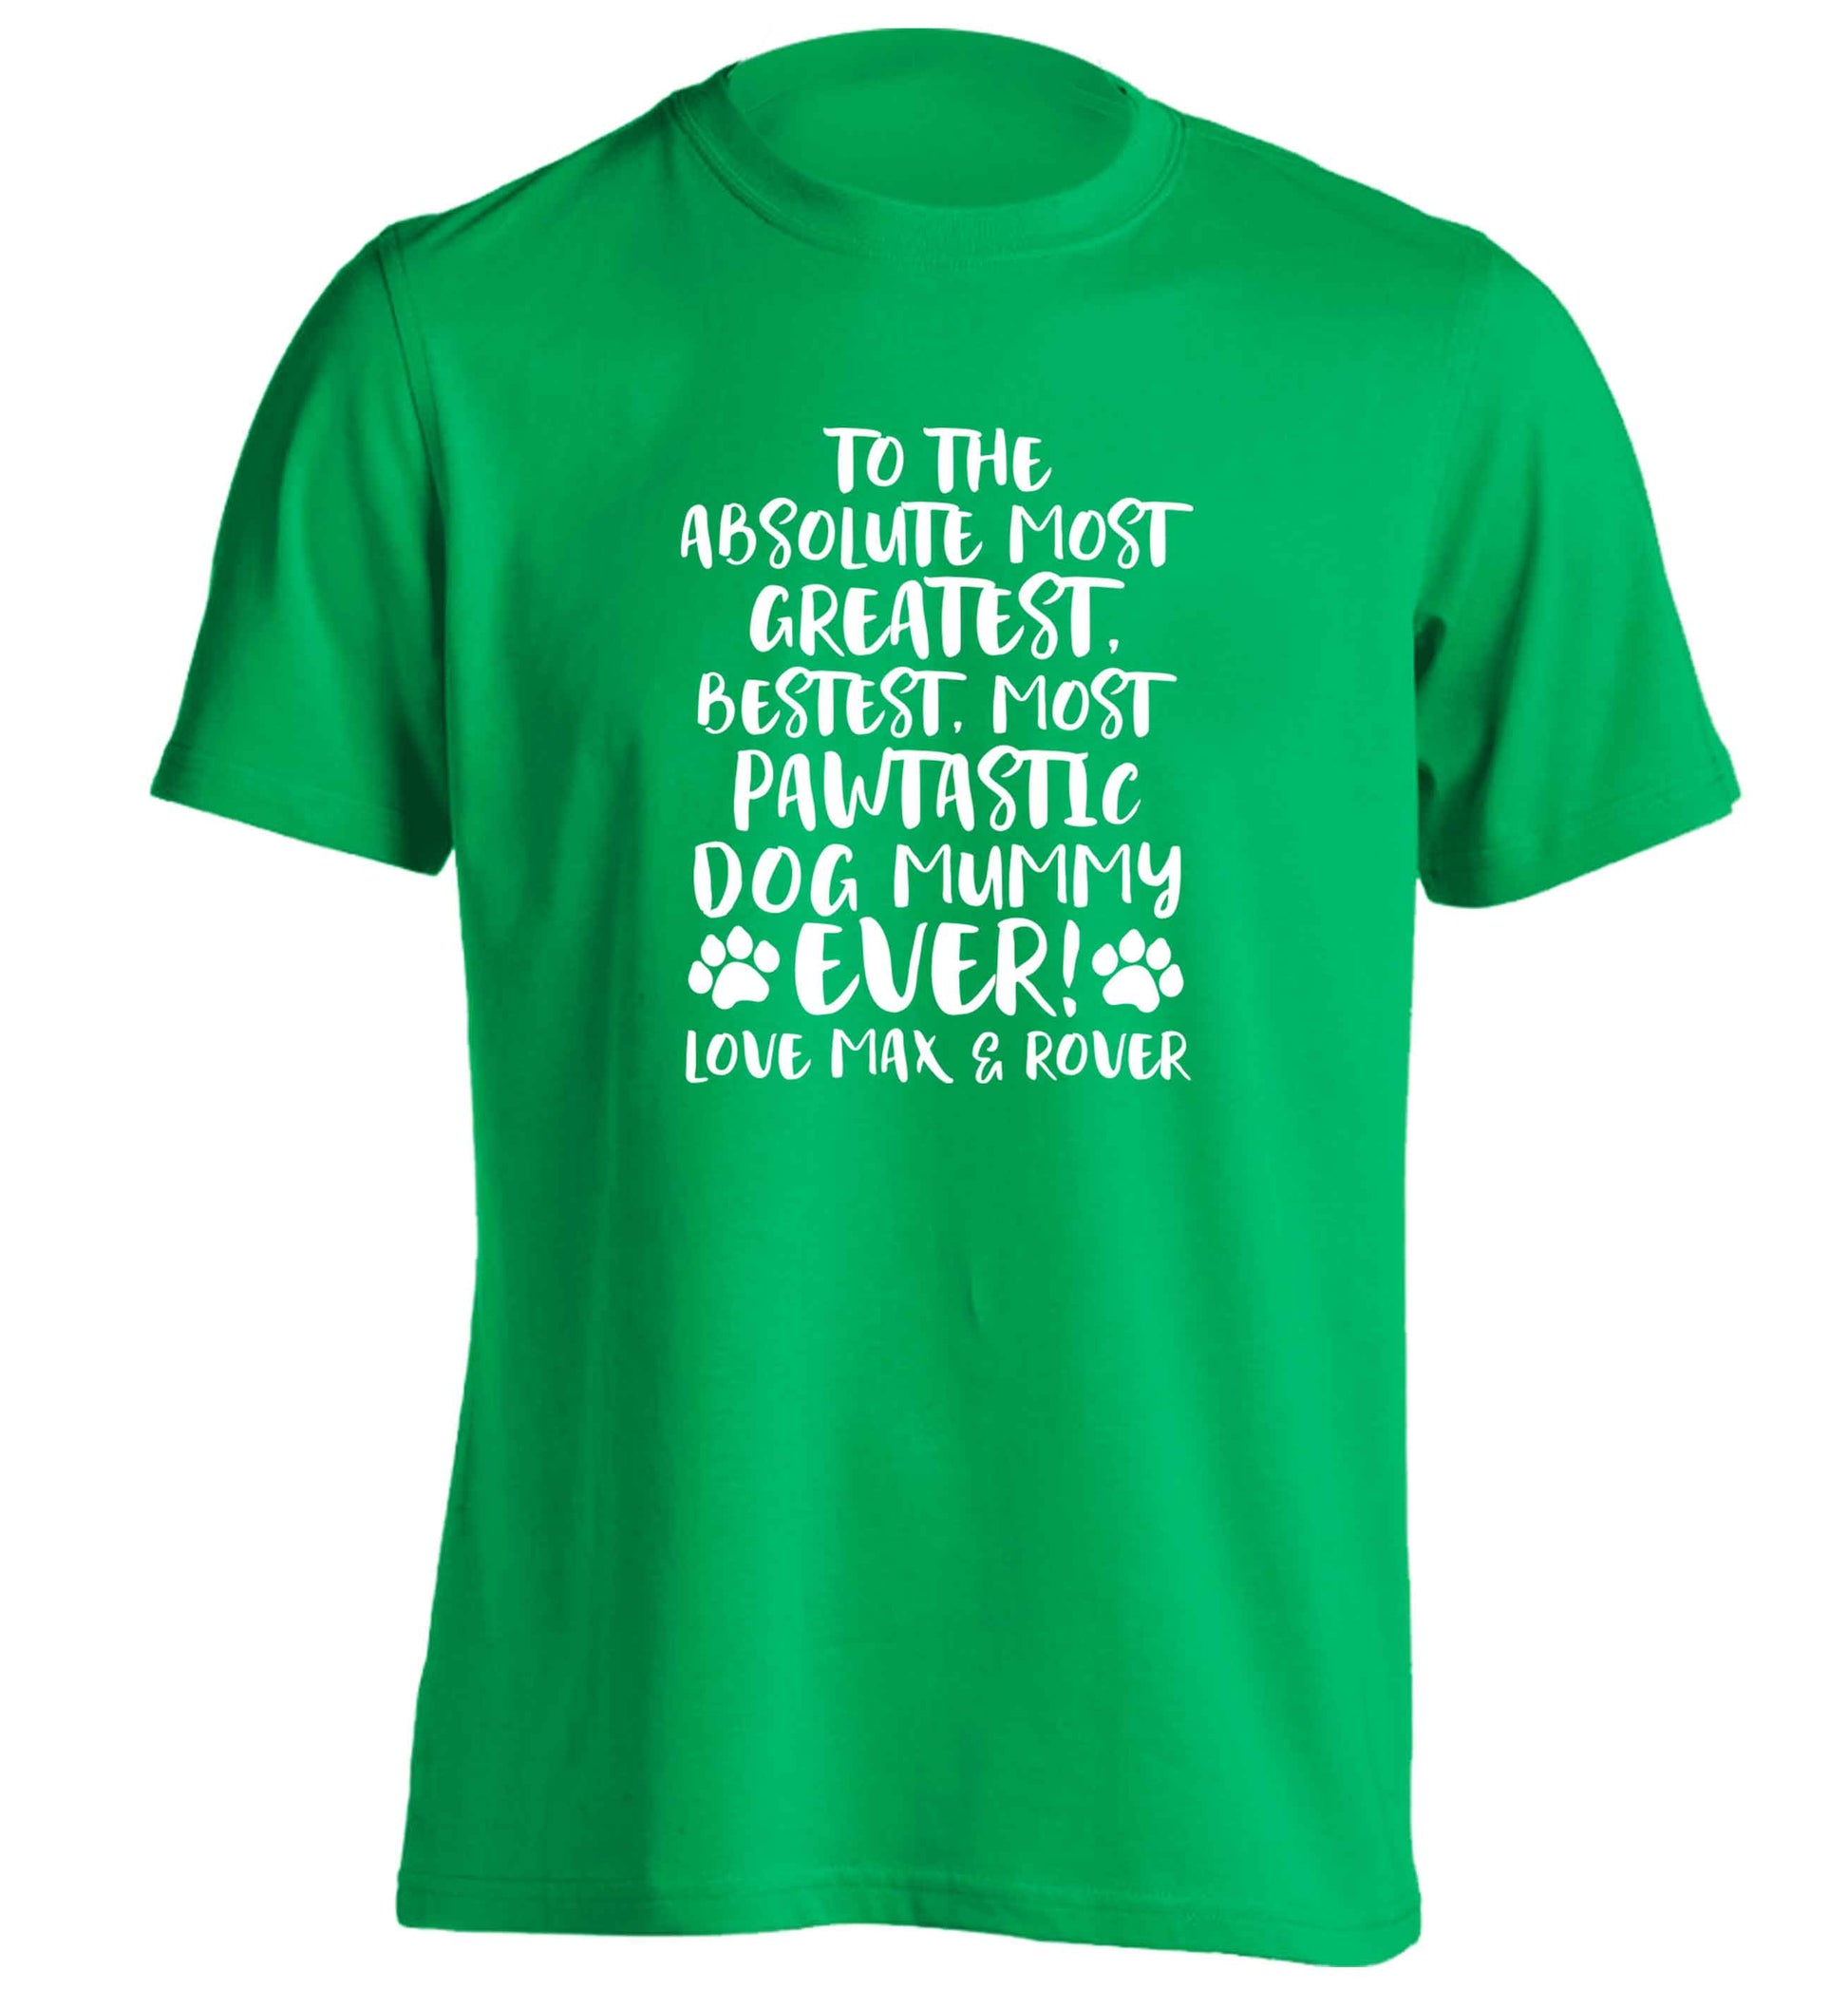 Personalsied to the most pawtastic dog mummy ever adults unisex green Tshirt 2XL